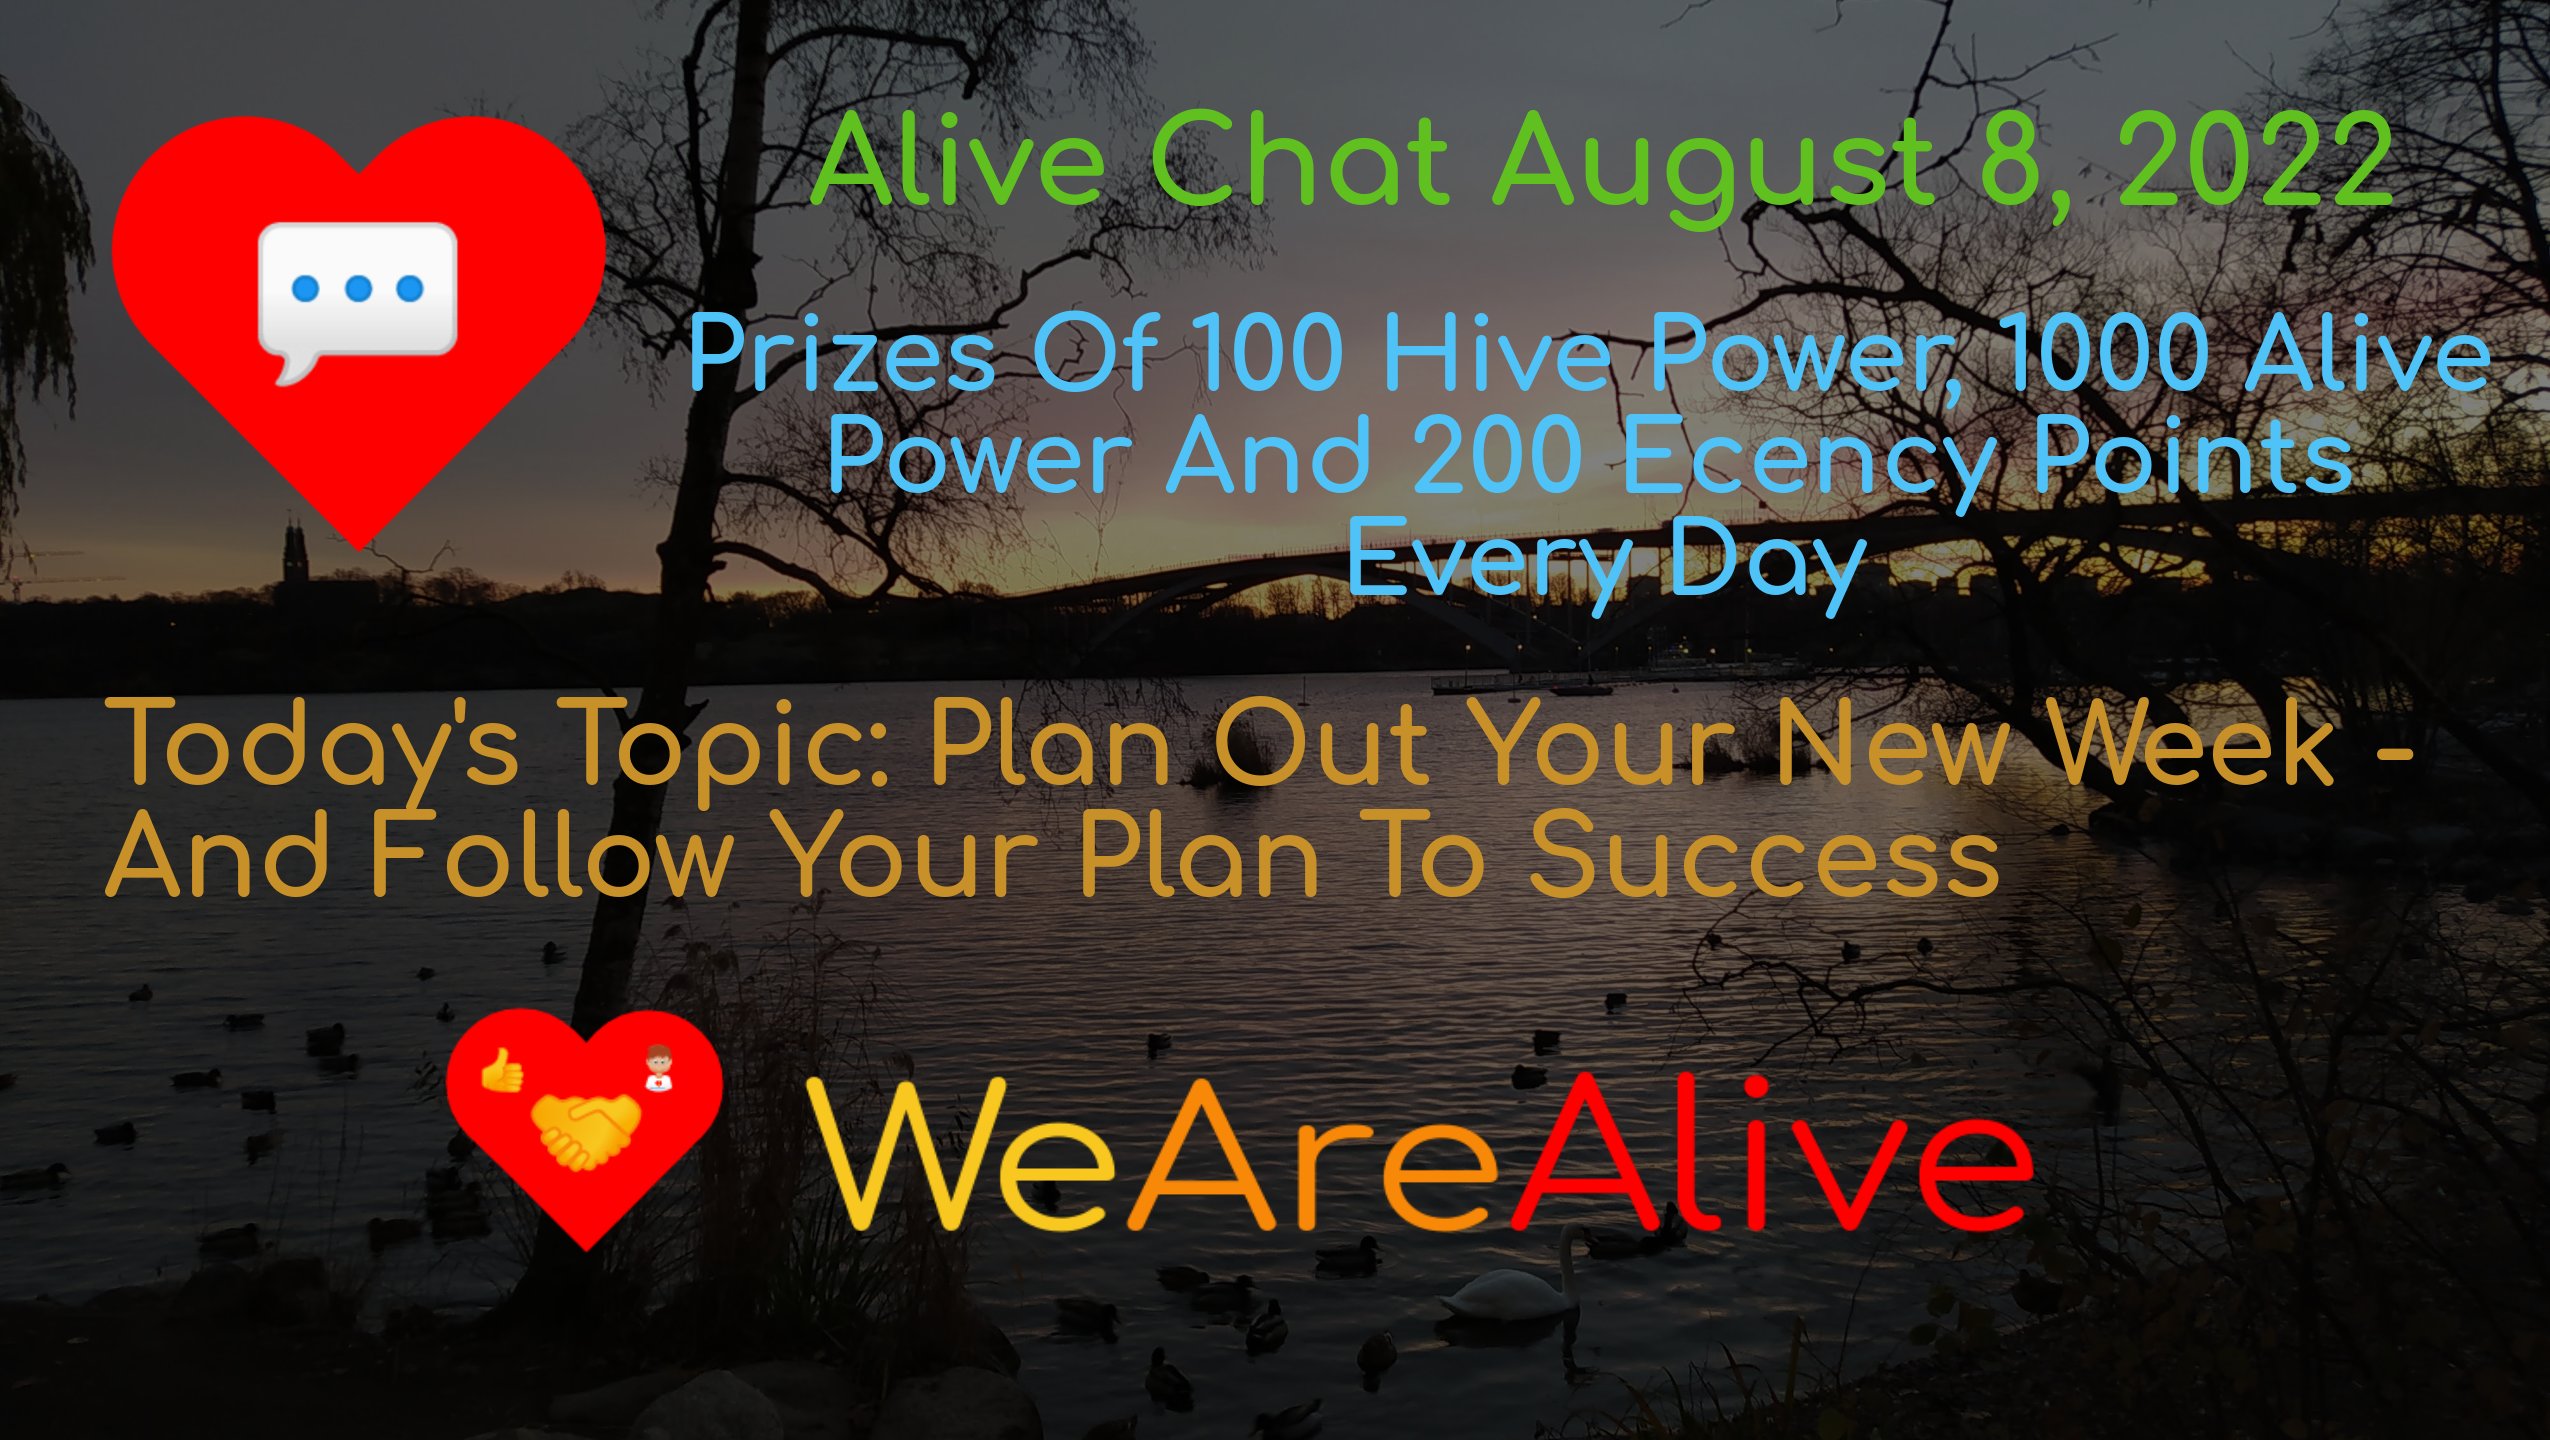 @alive.chat/alive-chat-august-8-2022-daily-prize-drawing-open-for-entries-todays-topic-plan-out-your-new-week-and-follow-your-plan-to-succ